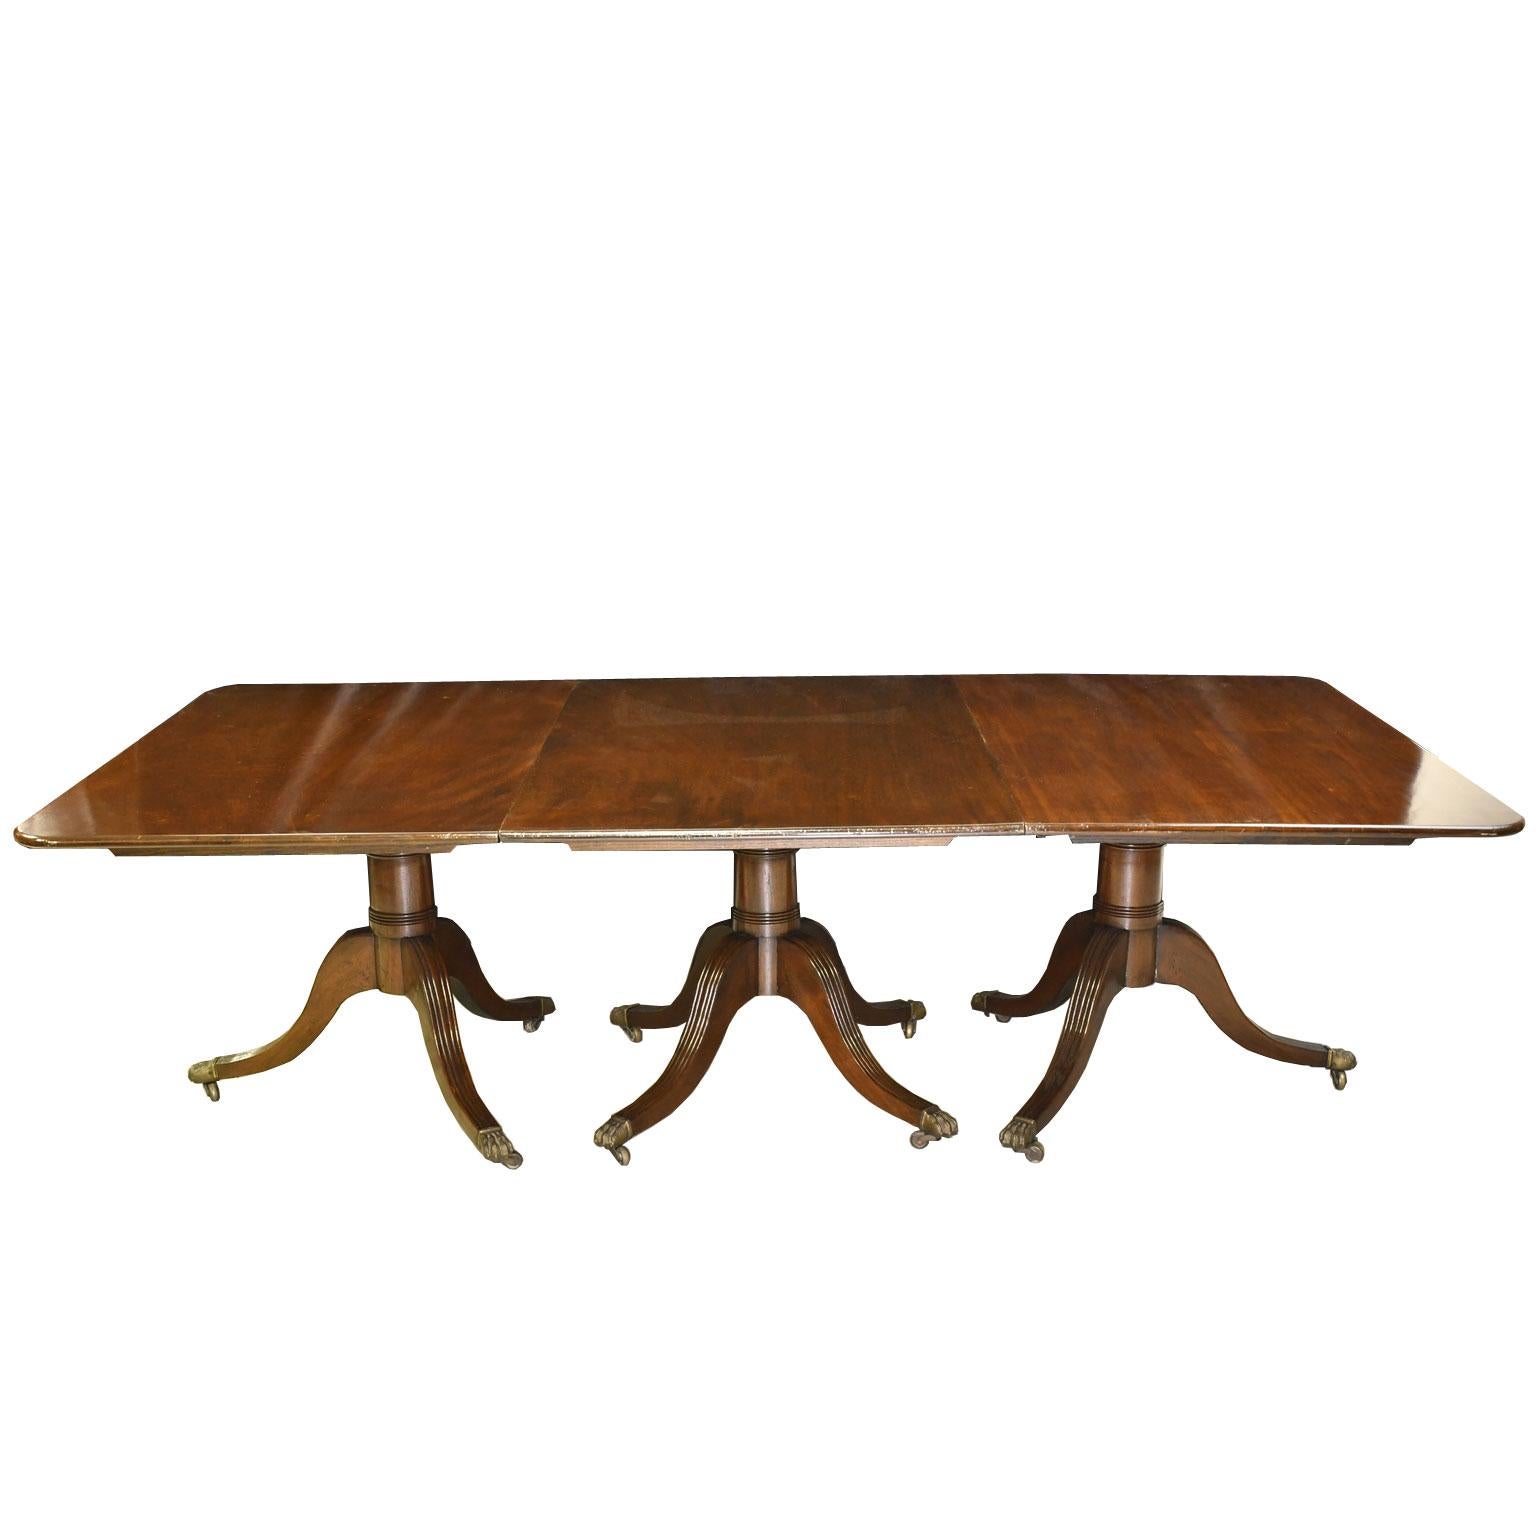 Hand-Carved 13' English Sheraton Dining Table in Mahogany, 3 Pedestals, 2 Leaves, circa 1850